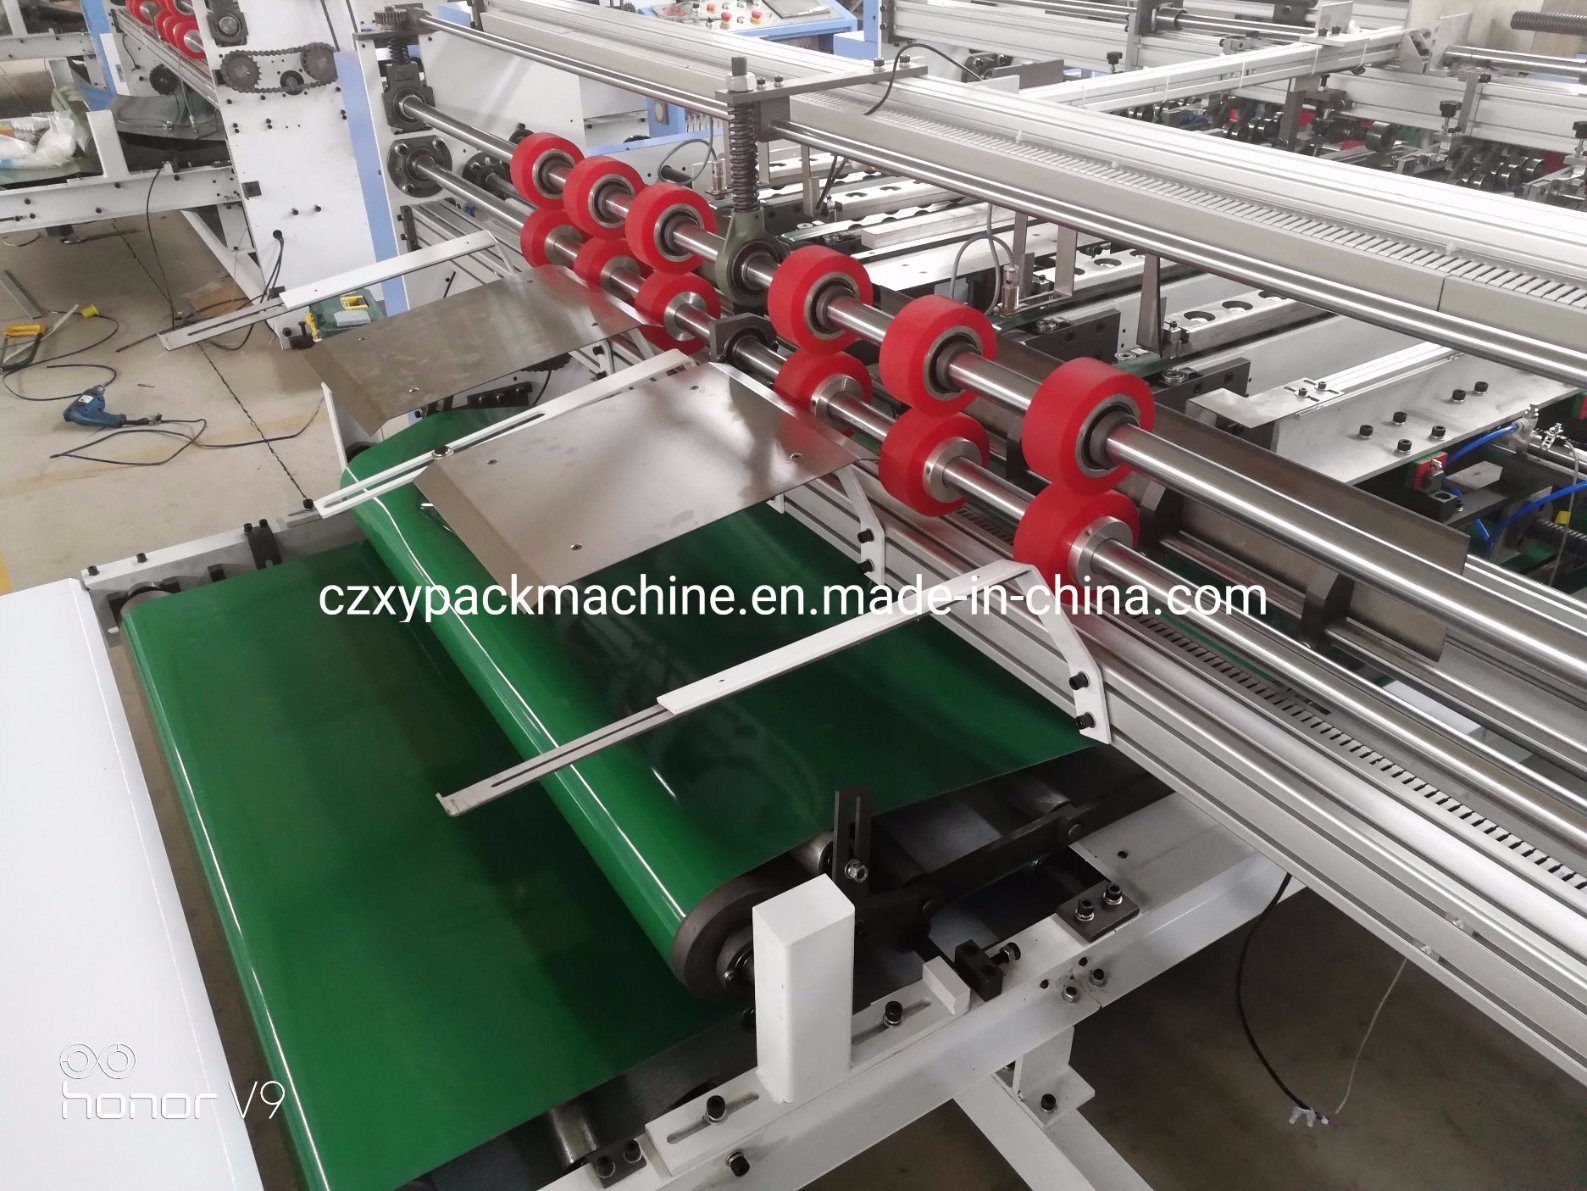 Four Working Position Double Piece Corrugated Box Forming Machine